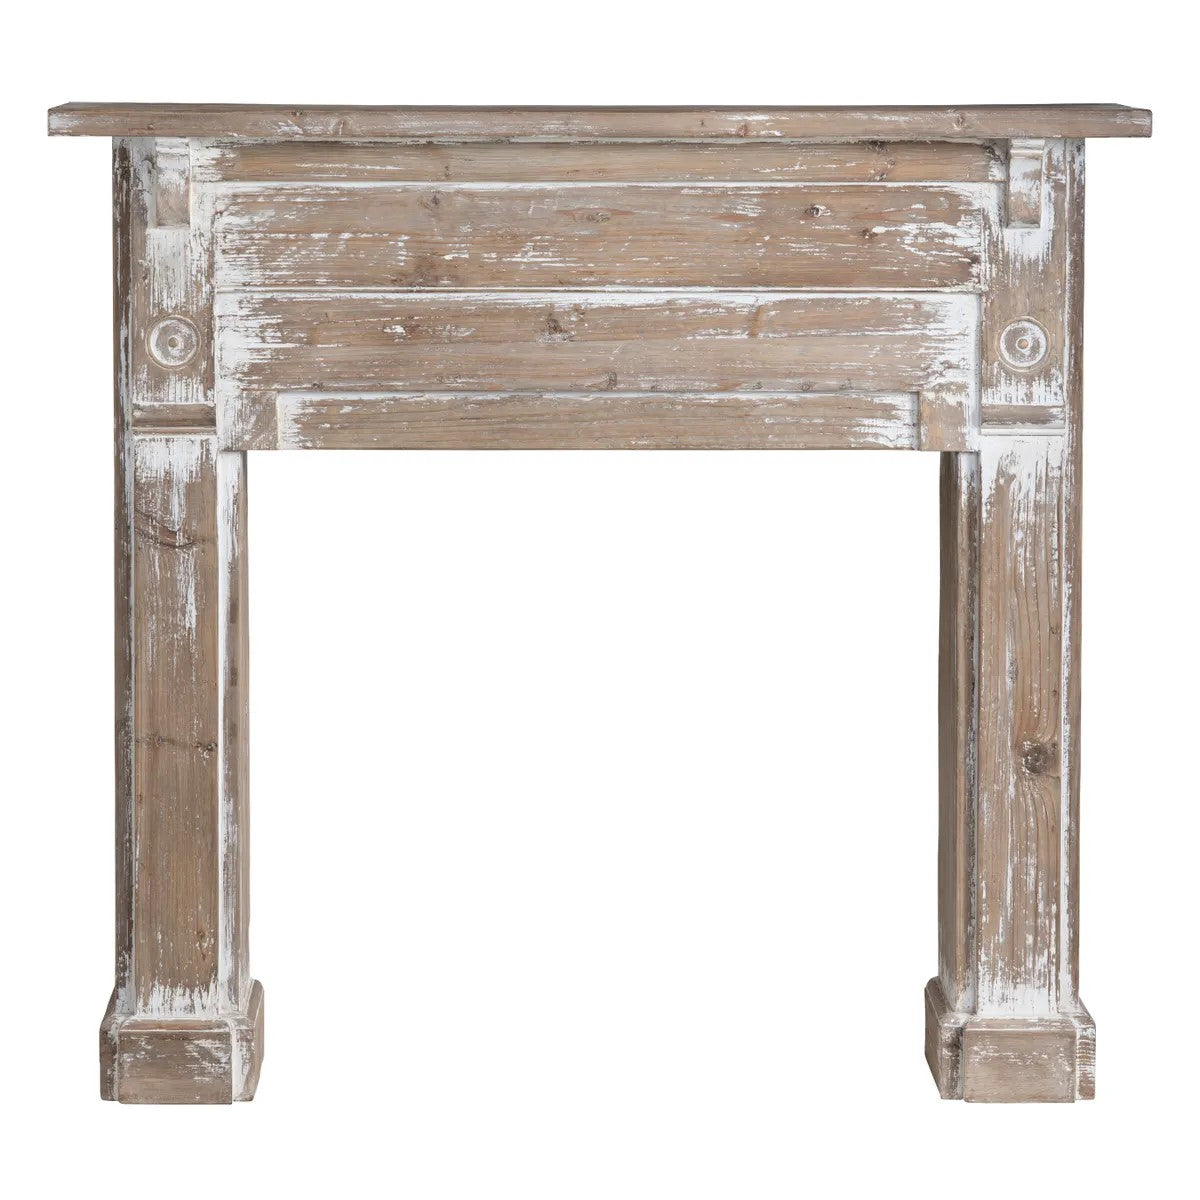 Reclaimed Pine Fireplace Mantel for sale, Antique Wooden Fireplace Mantel for sale